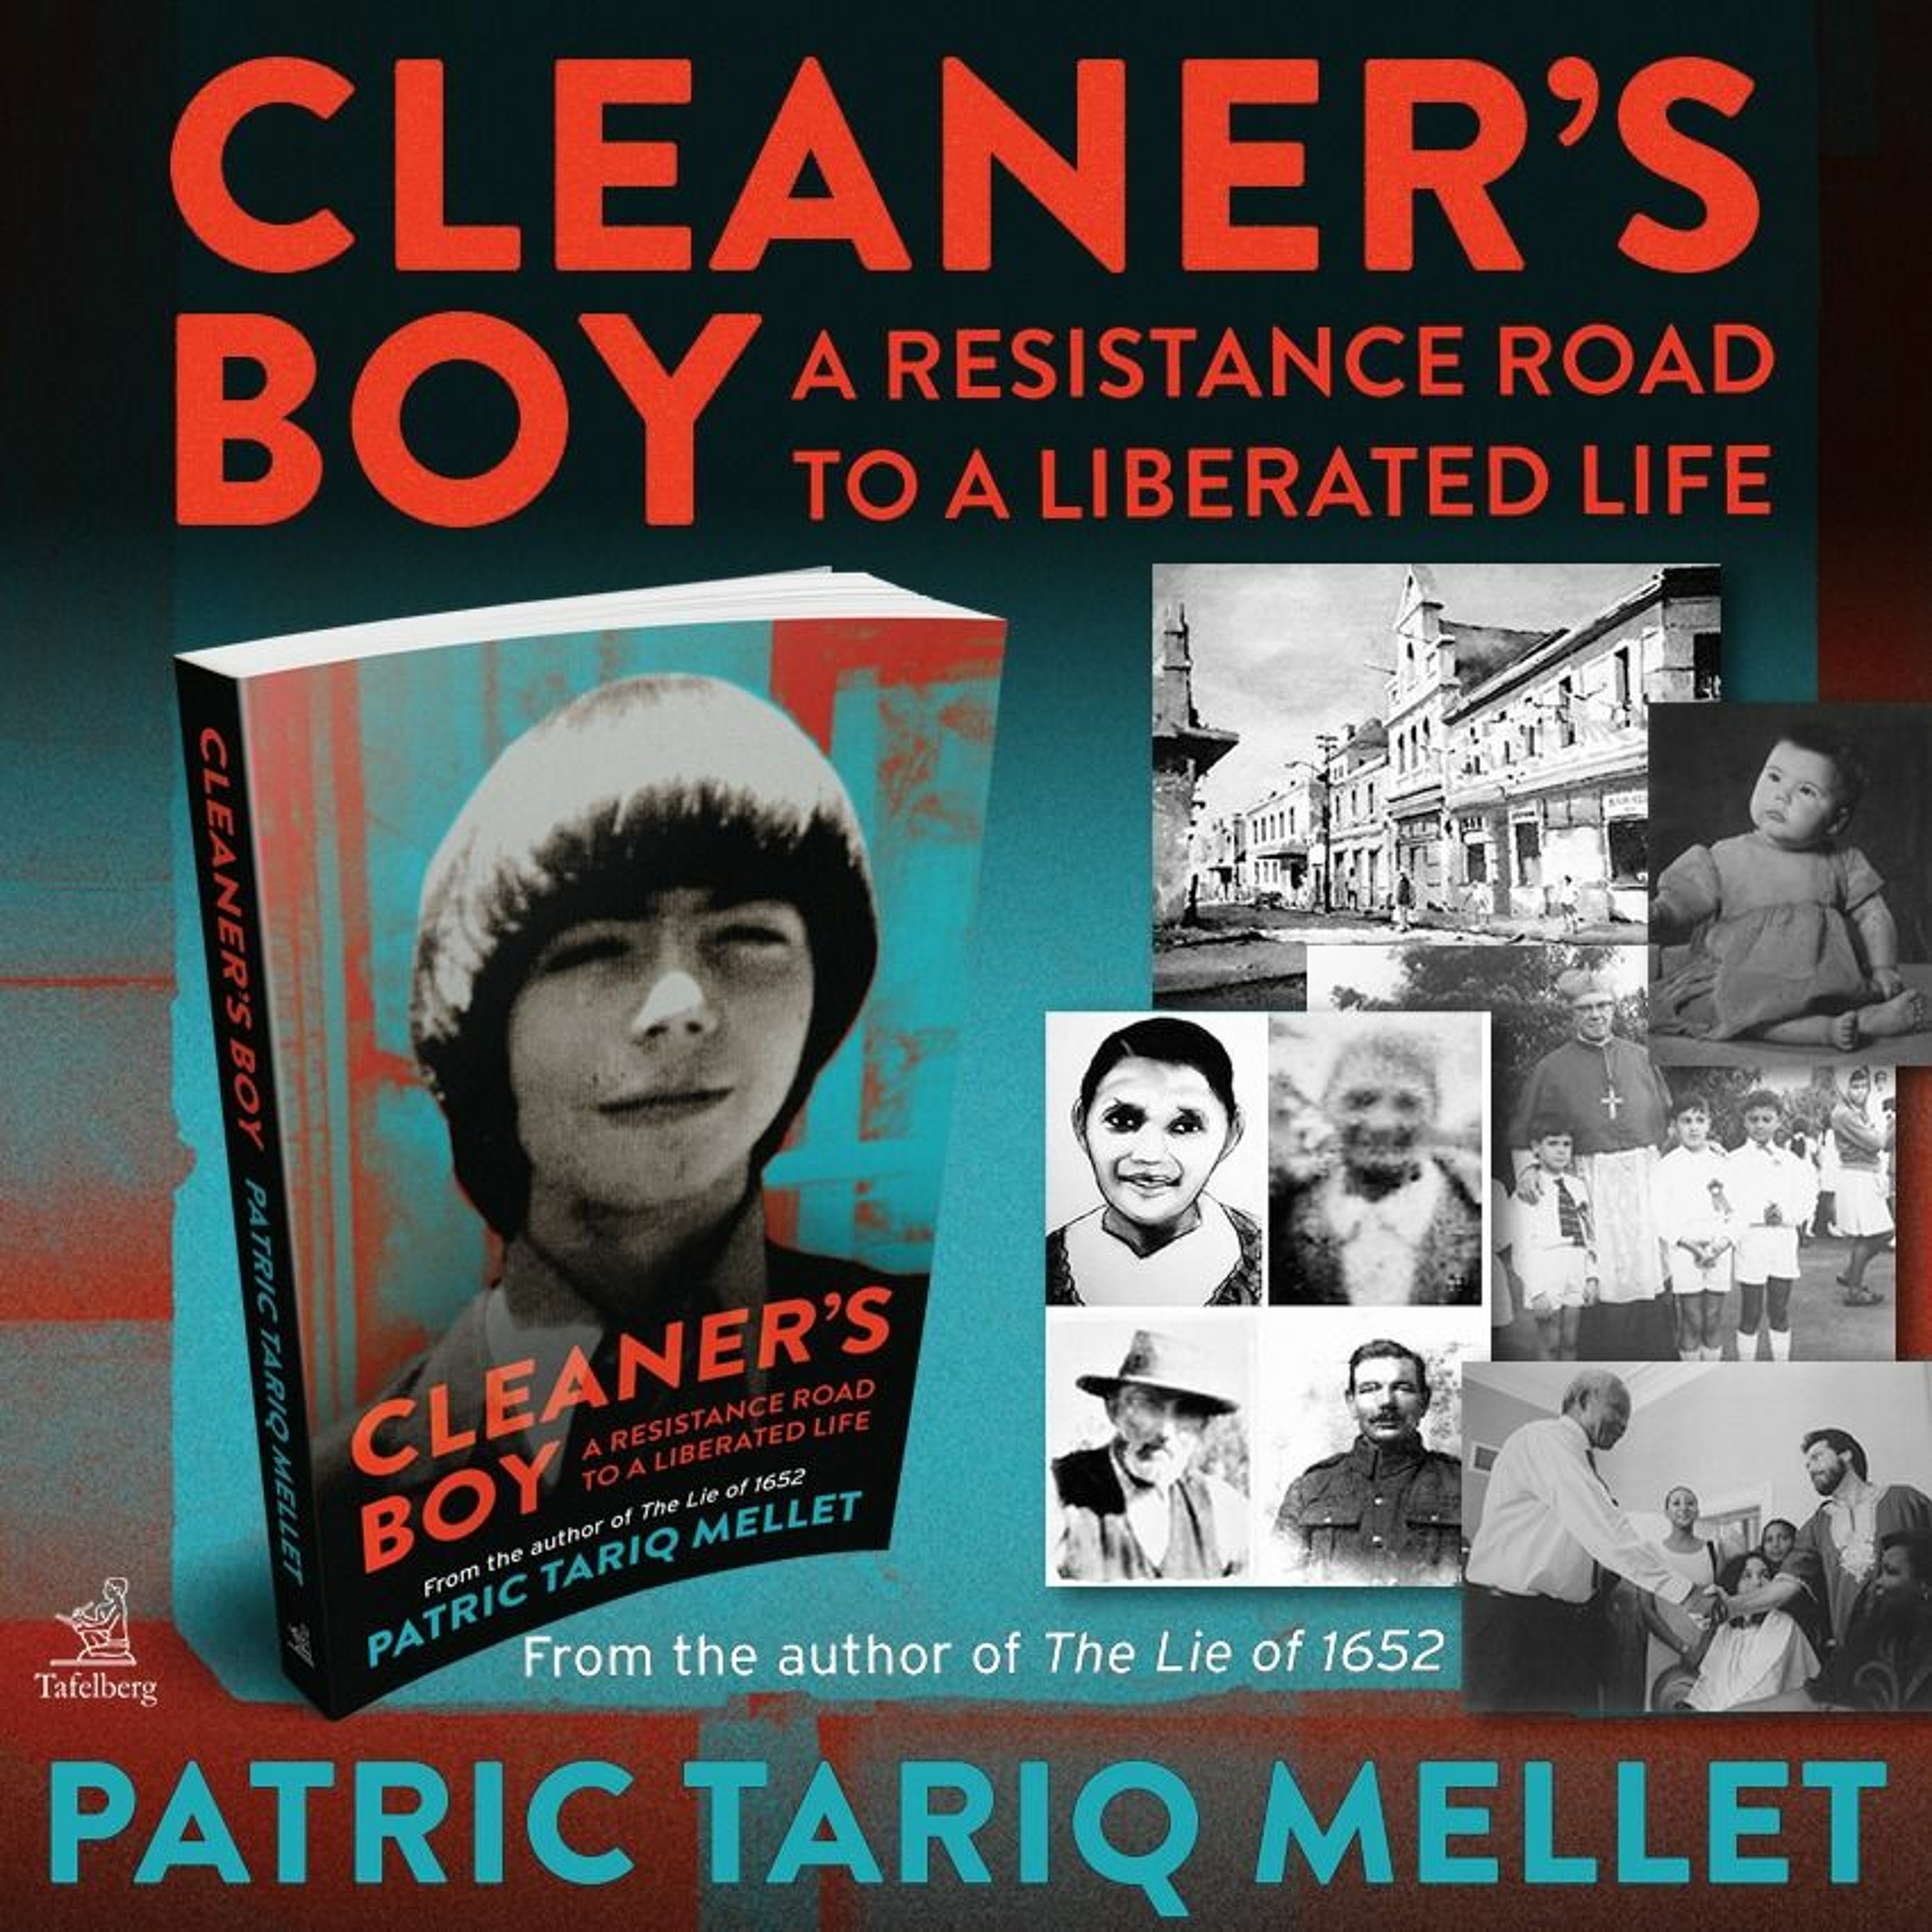 Tafelberg Book Chat: Cleaner’s Boy by Patric Tariq Mellet